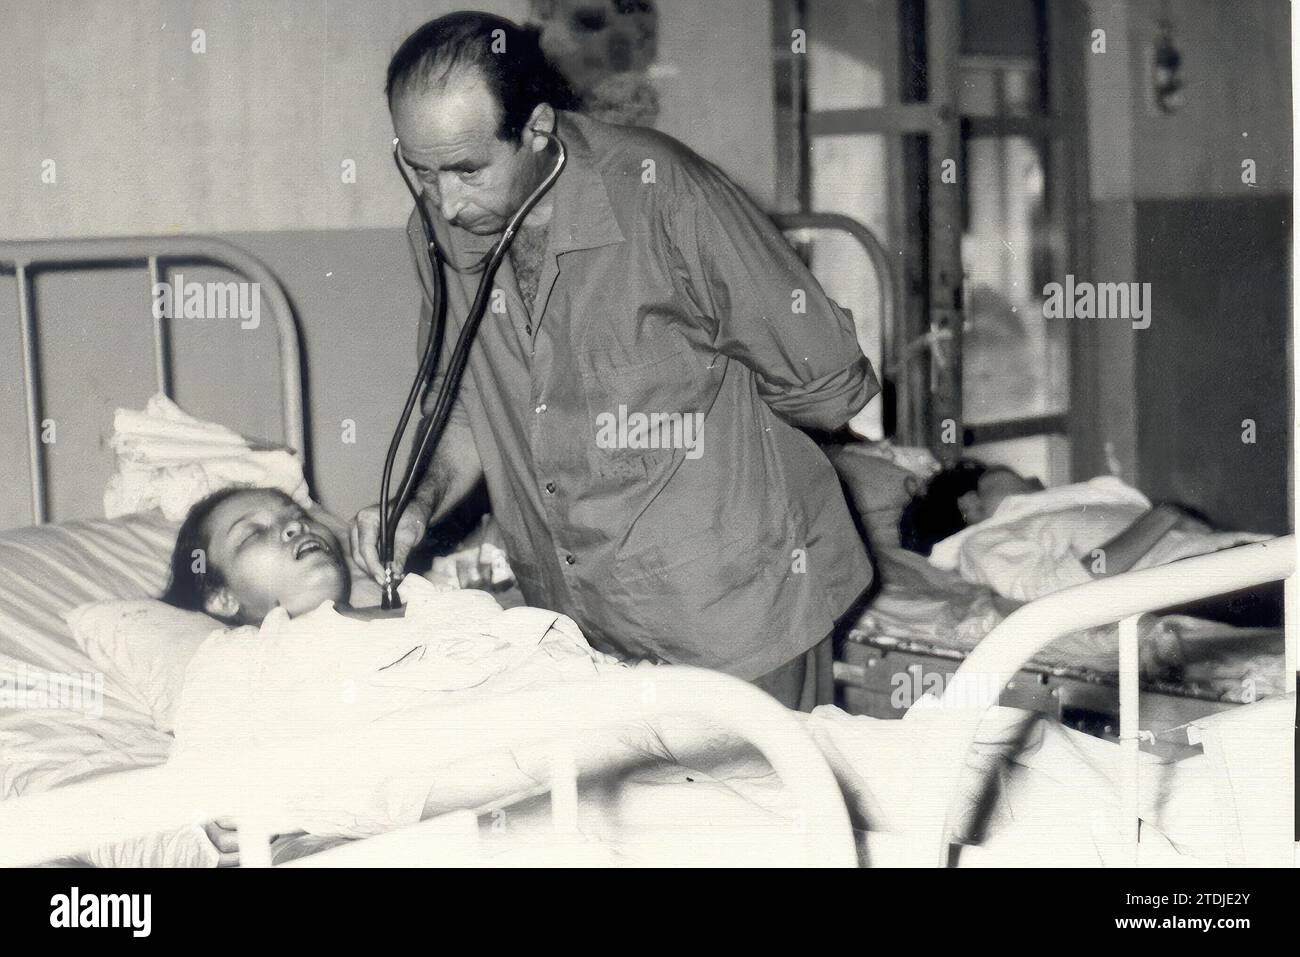 01/01/1967. Vietnam War. Spanish health mission in Gò-Công, a city in the Mekong Delta located 45 km away. from Saigon. A patient treated by a Spanish soldier at the Gò-Công hospital. Credit: Album / Archivo ABC Stock Photo